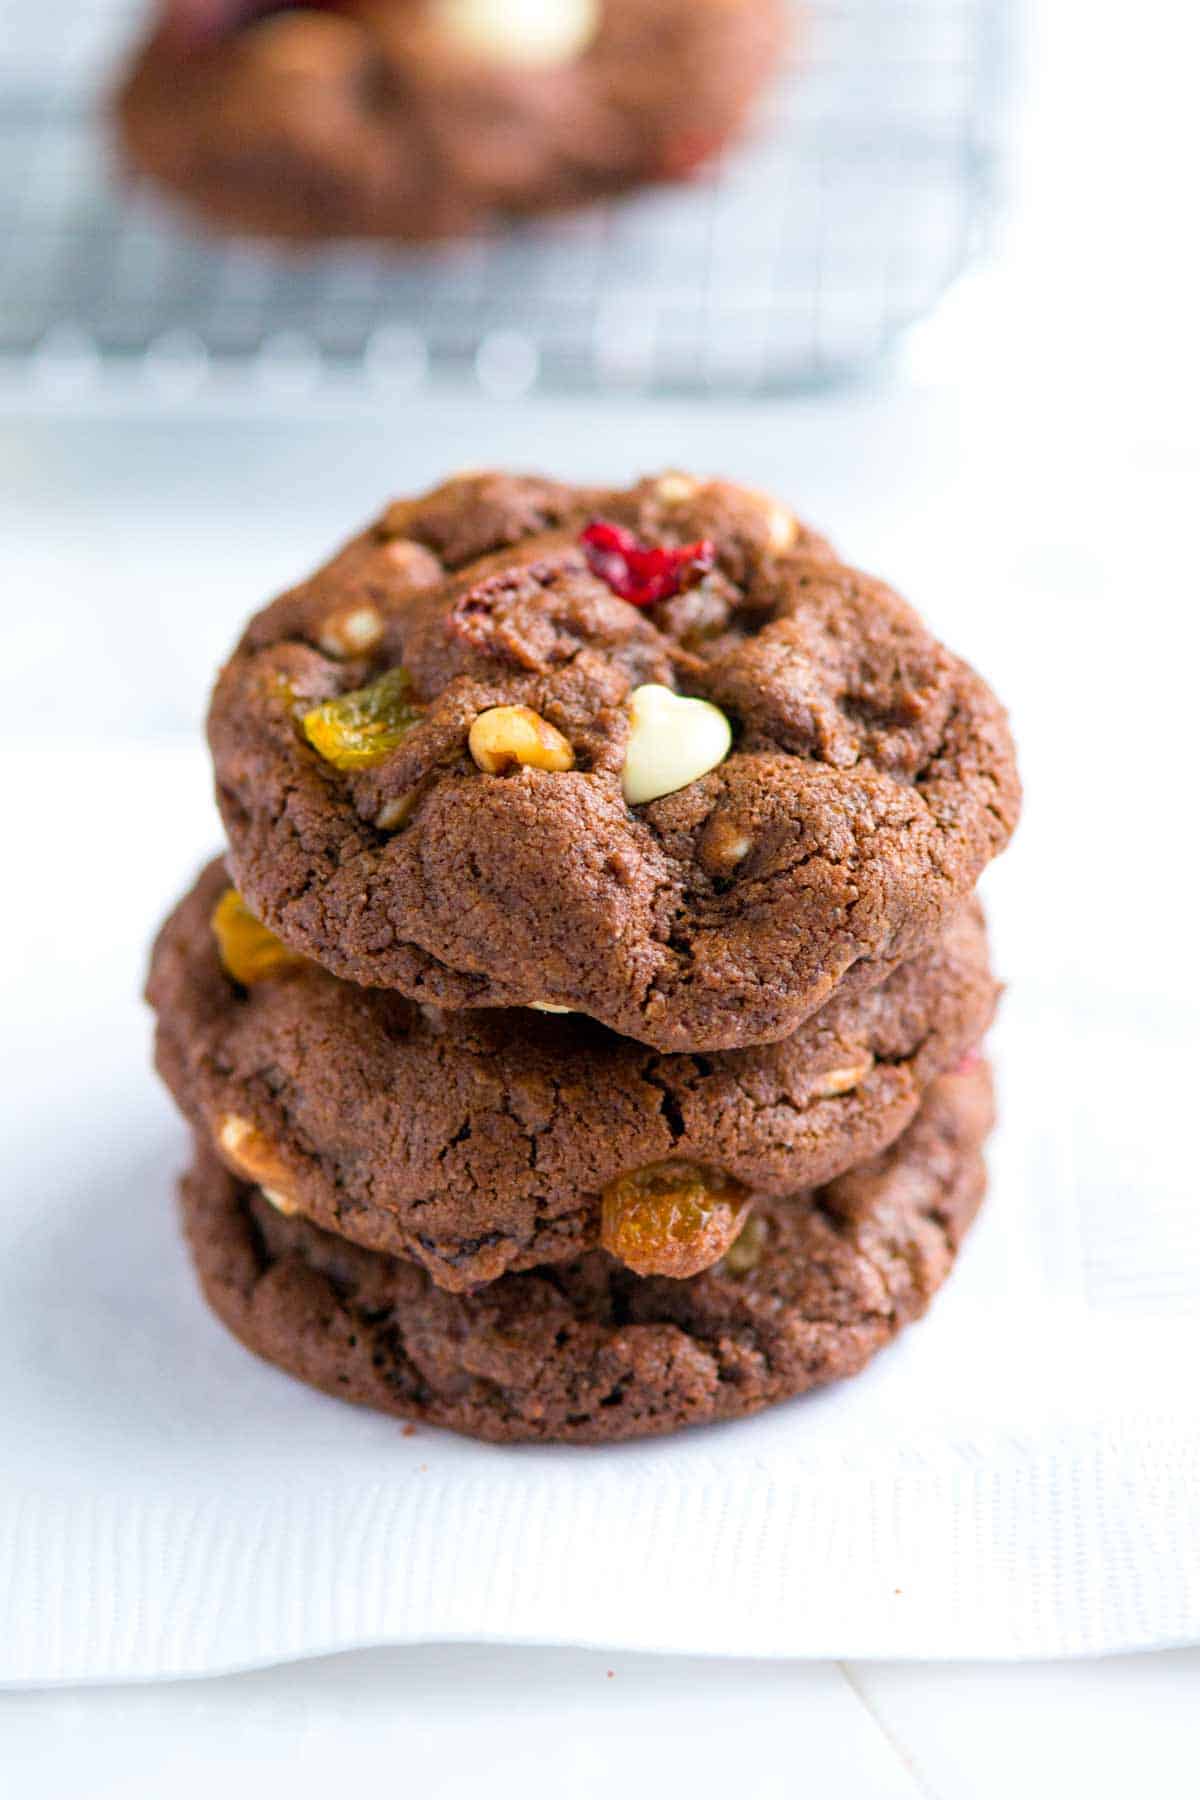 How to Make the Best Chocolate Cookies with Chocolate, Dried Fruit and Nuts